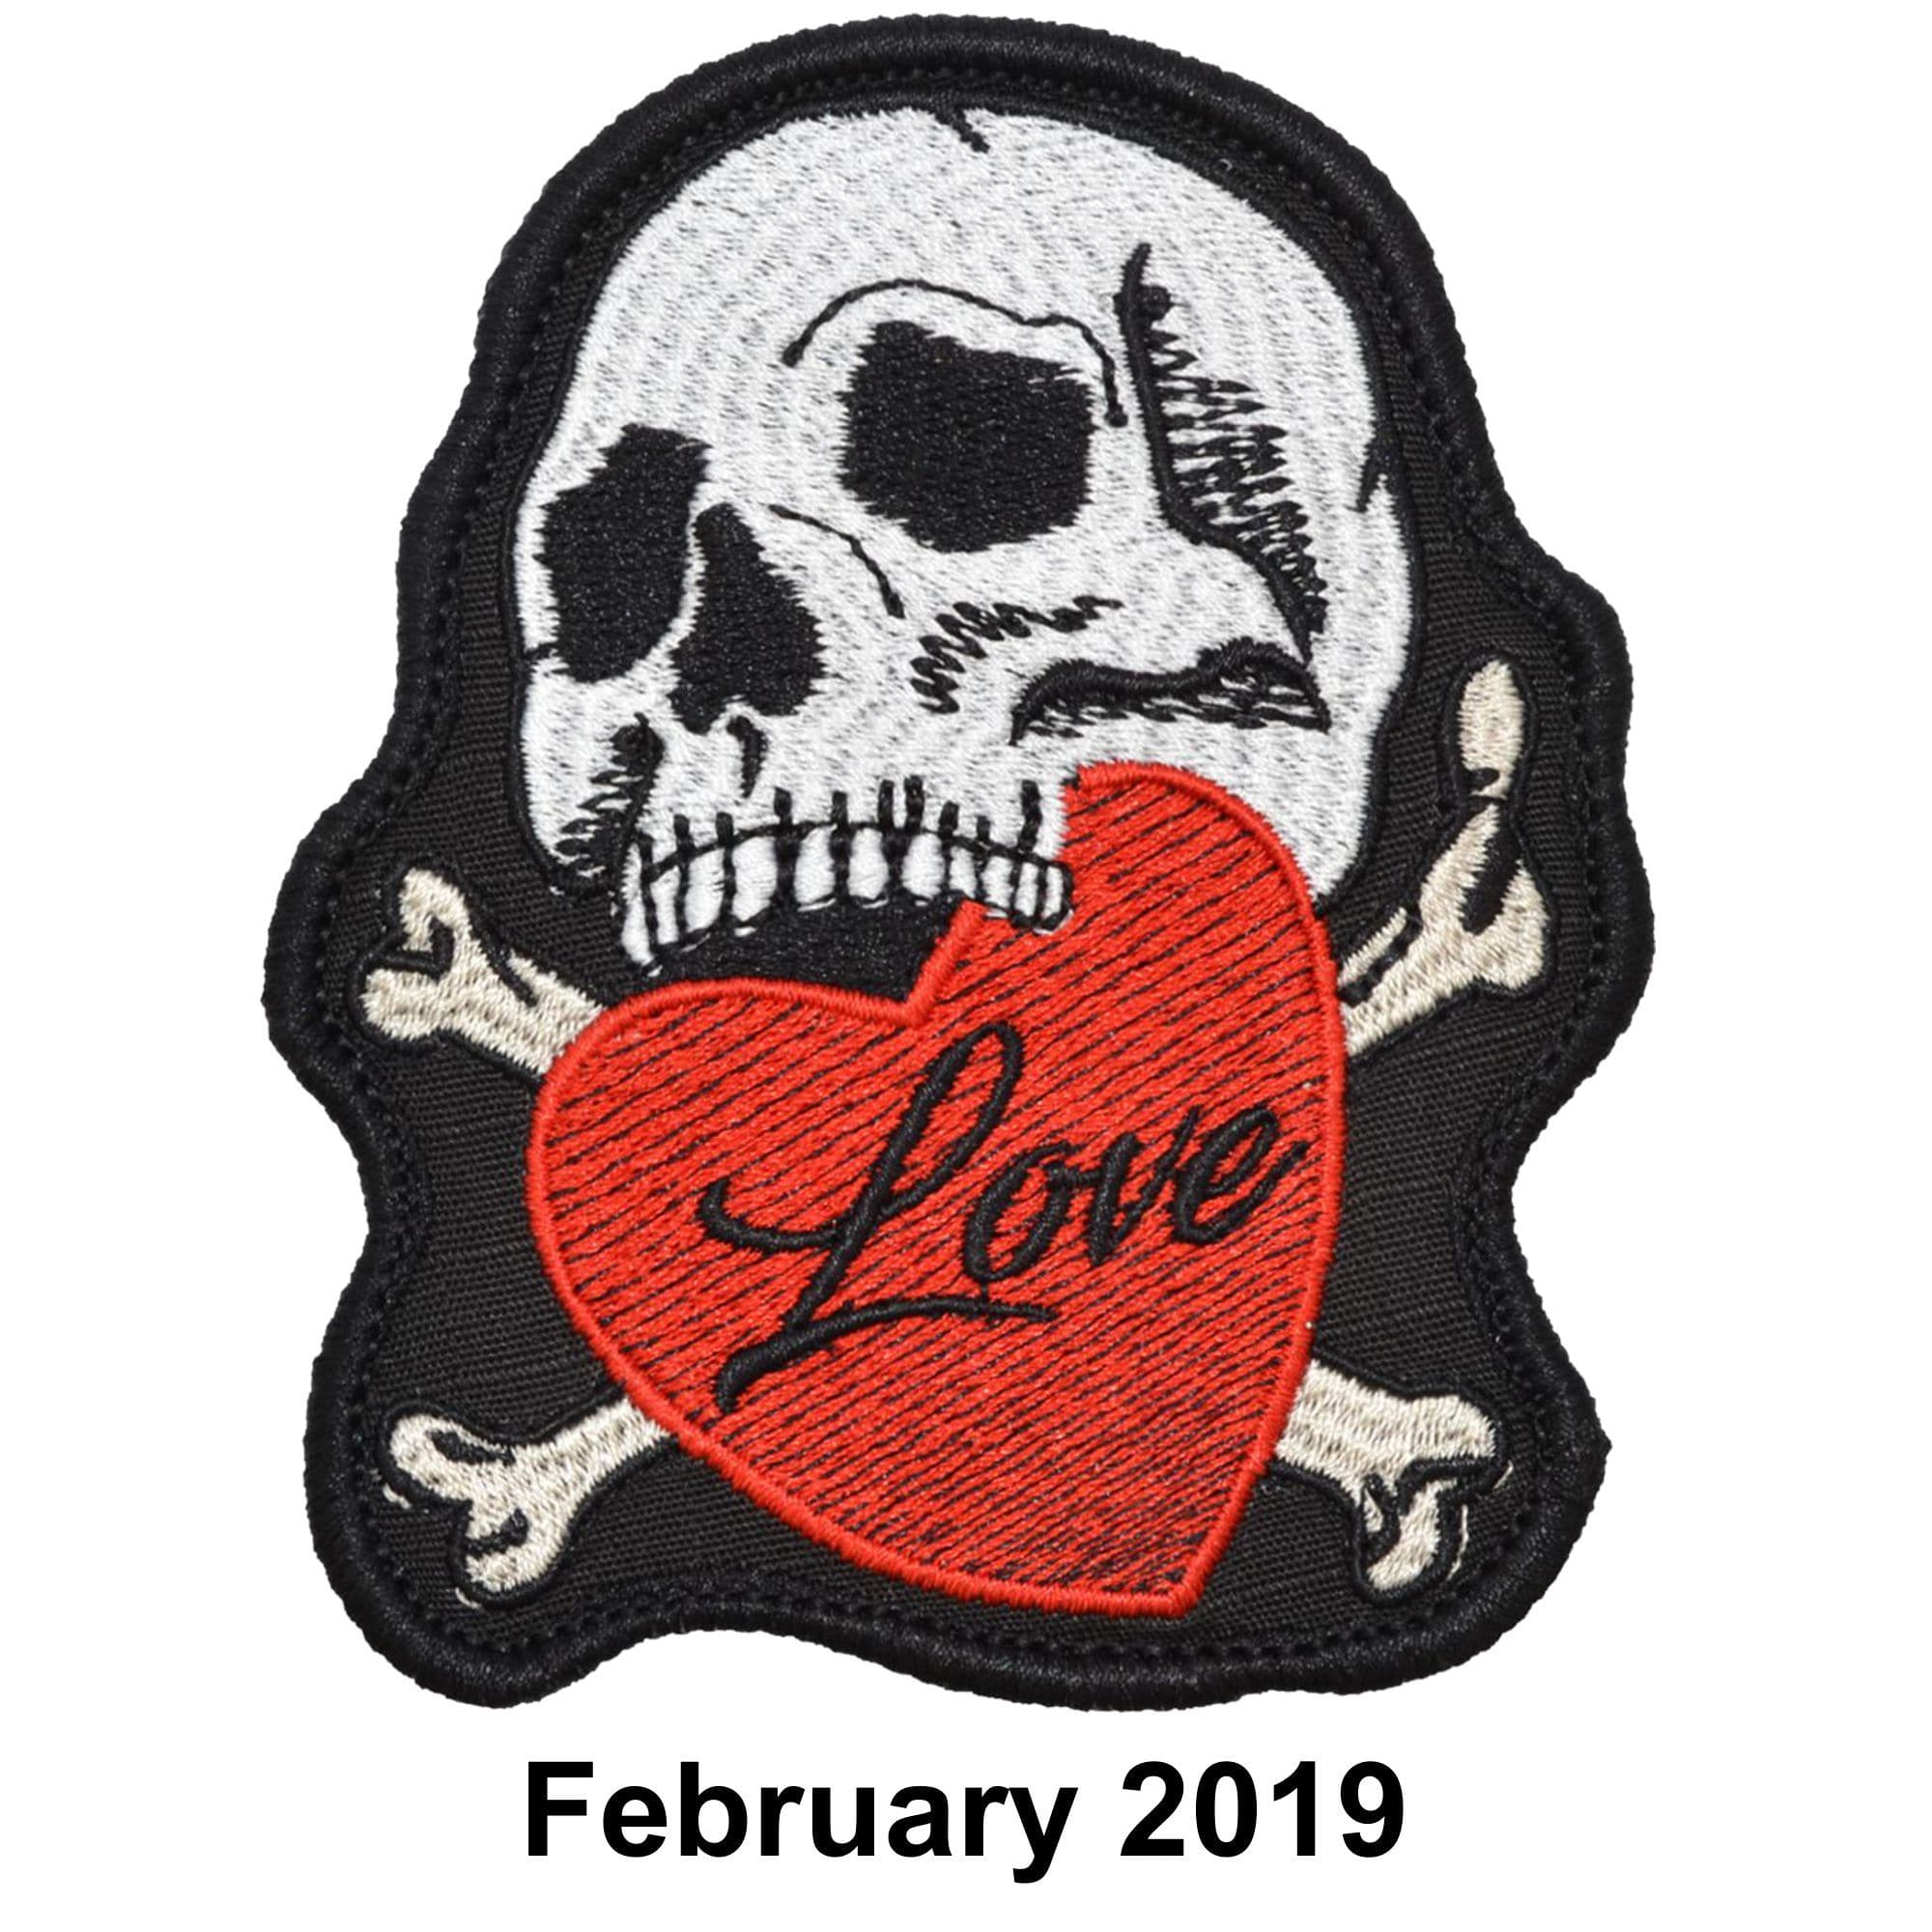 February 2019 Patch of the Month - Love and Hate Heart Skulls